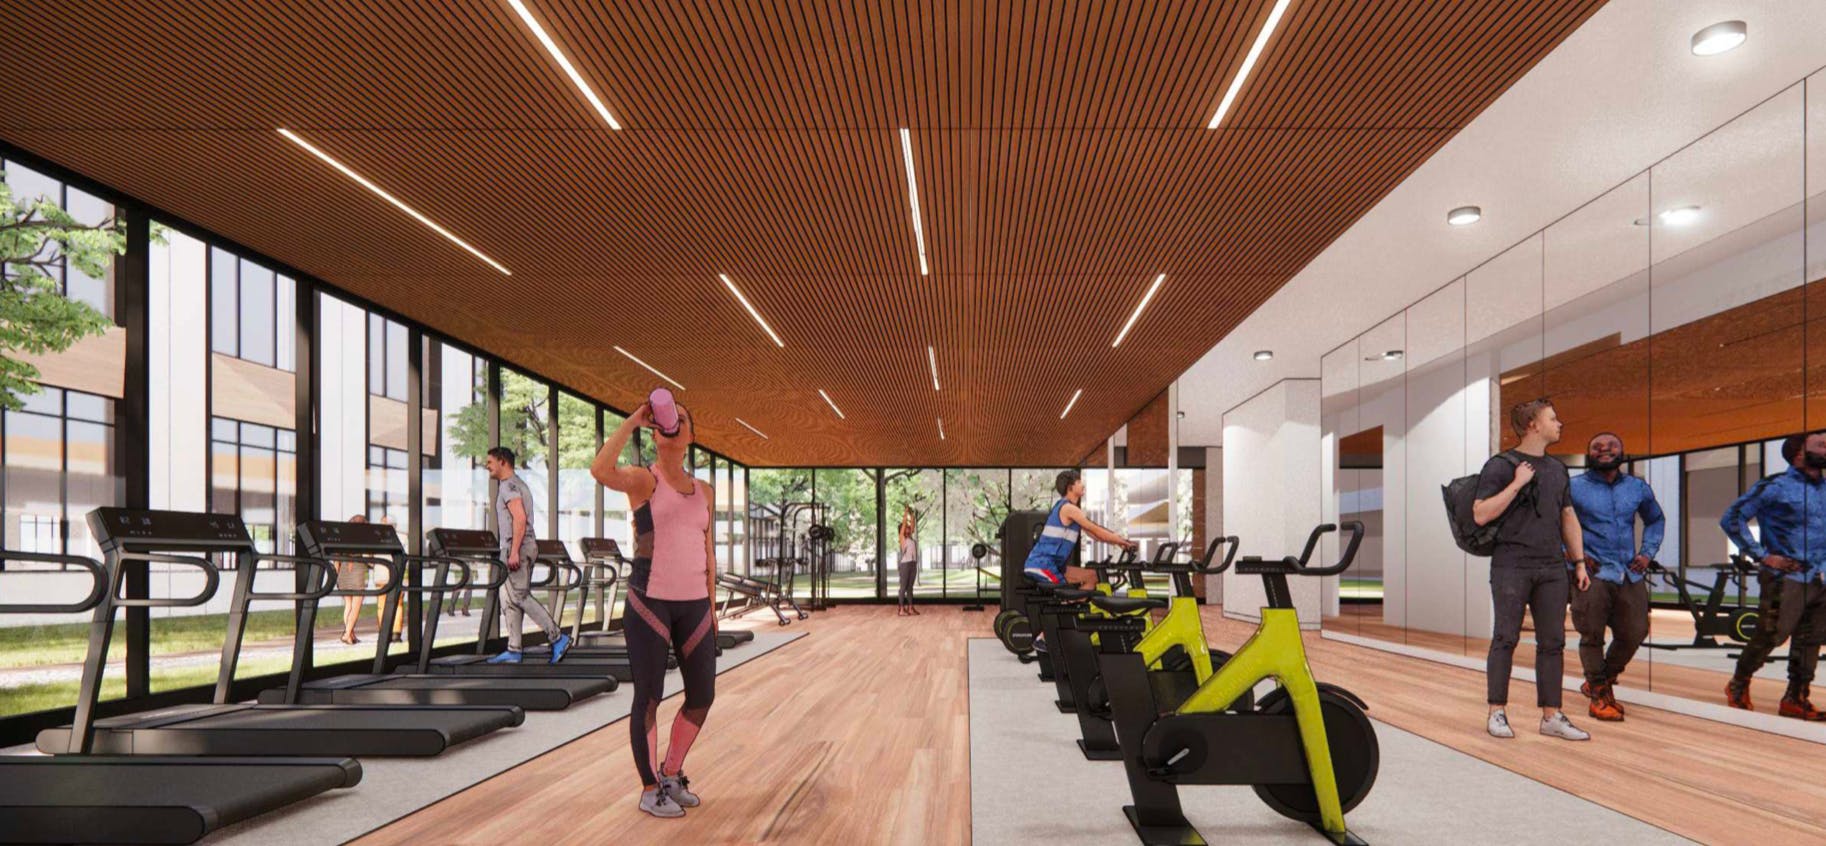 Rendering of a fitness center with people using treadmills and stationary bikes